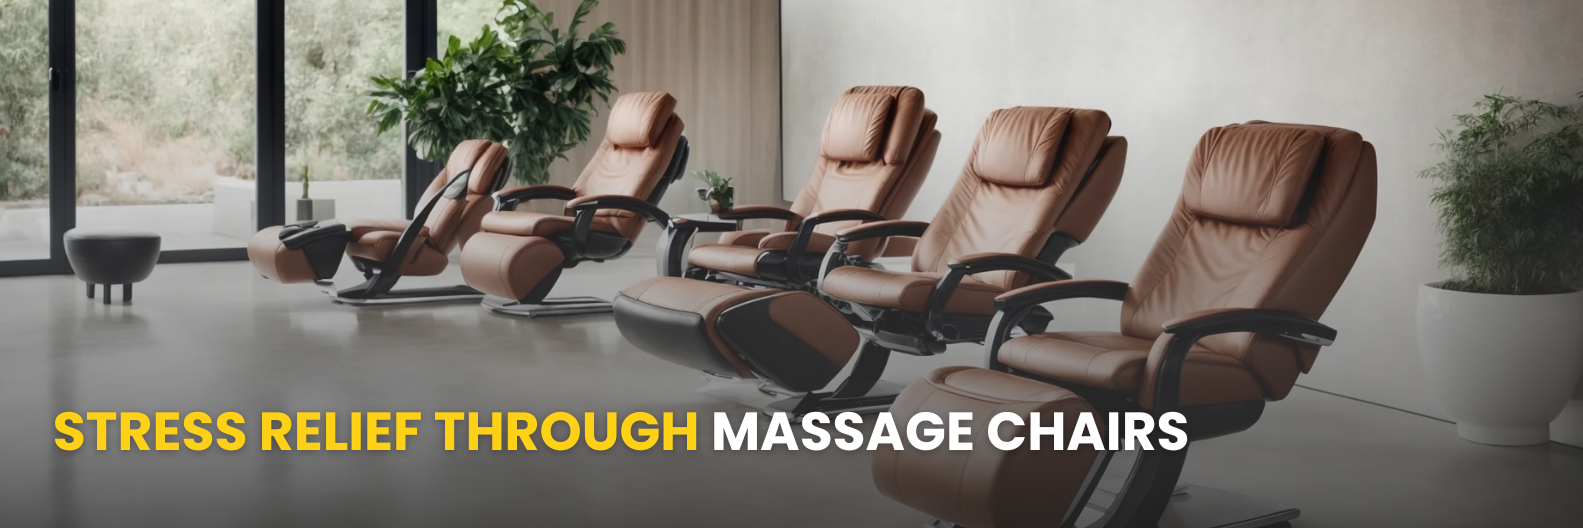 Discover relaxation at Find Serenity with our range of massage chairs designed for stress reduction. Browse our collection featuring Osaki, Luraco, and other top brands. Start shopping today for the finest massage chair offers!